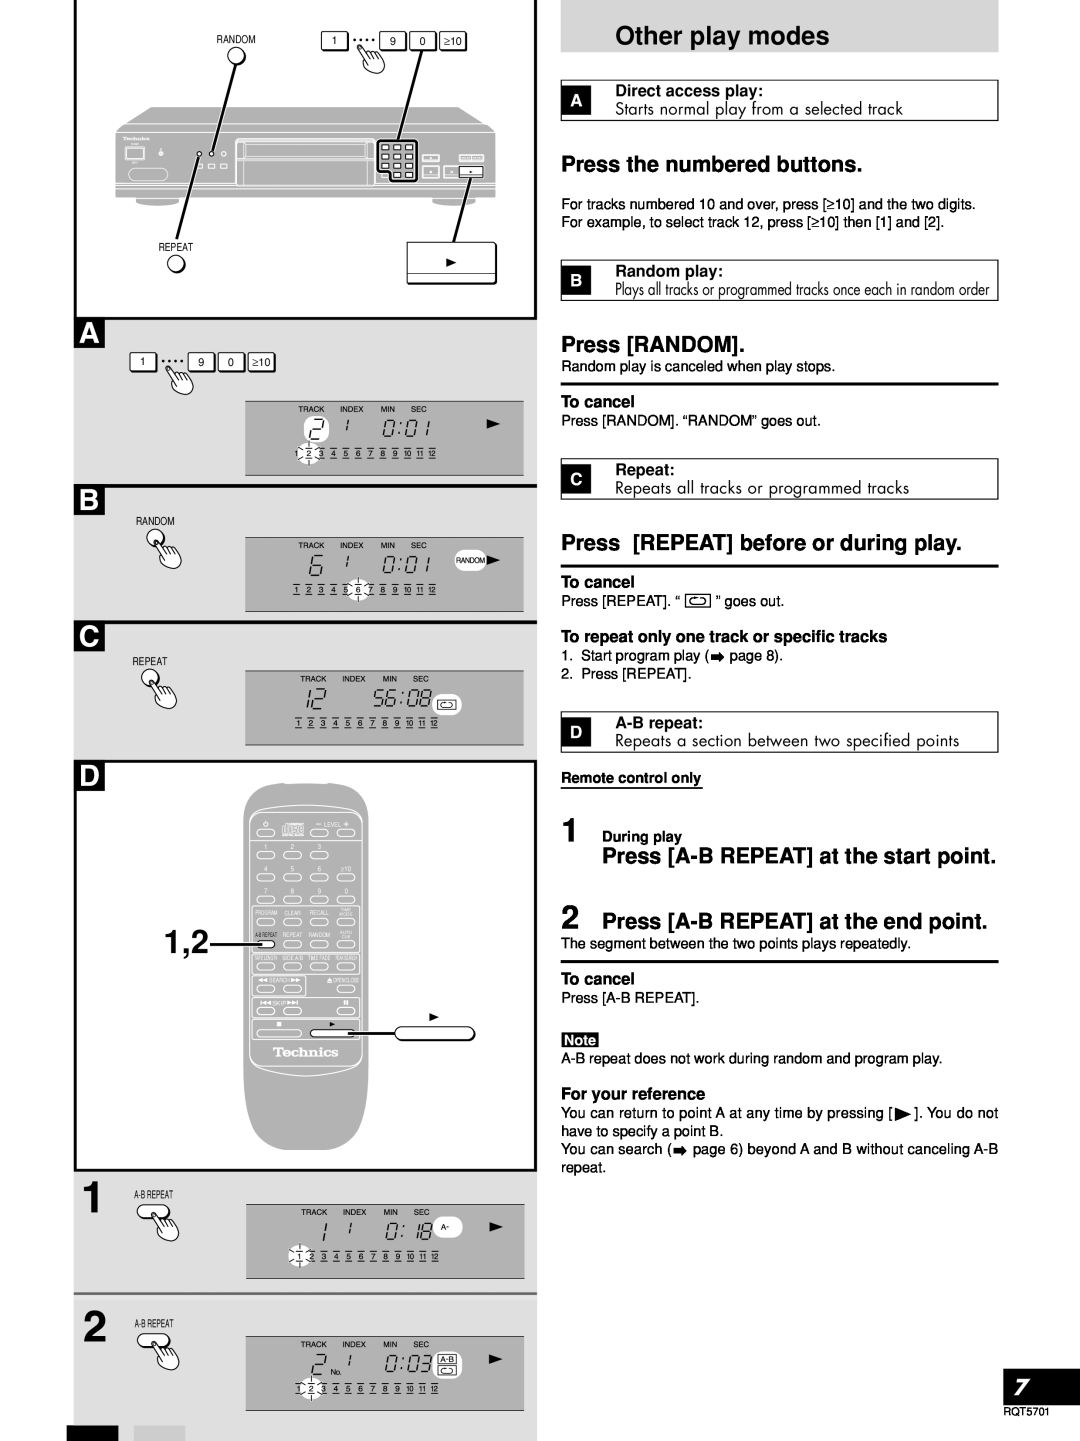 Panasonic SL-PG4 manual Other play modes, Press the numbered buttons, Press RANDOM, Press REPEAT before or during play 